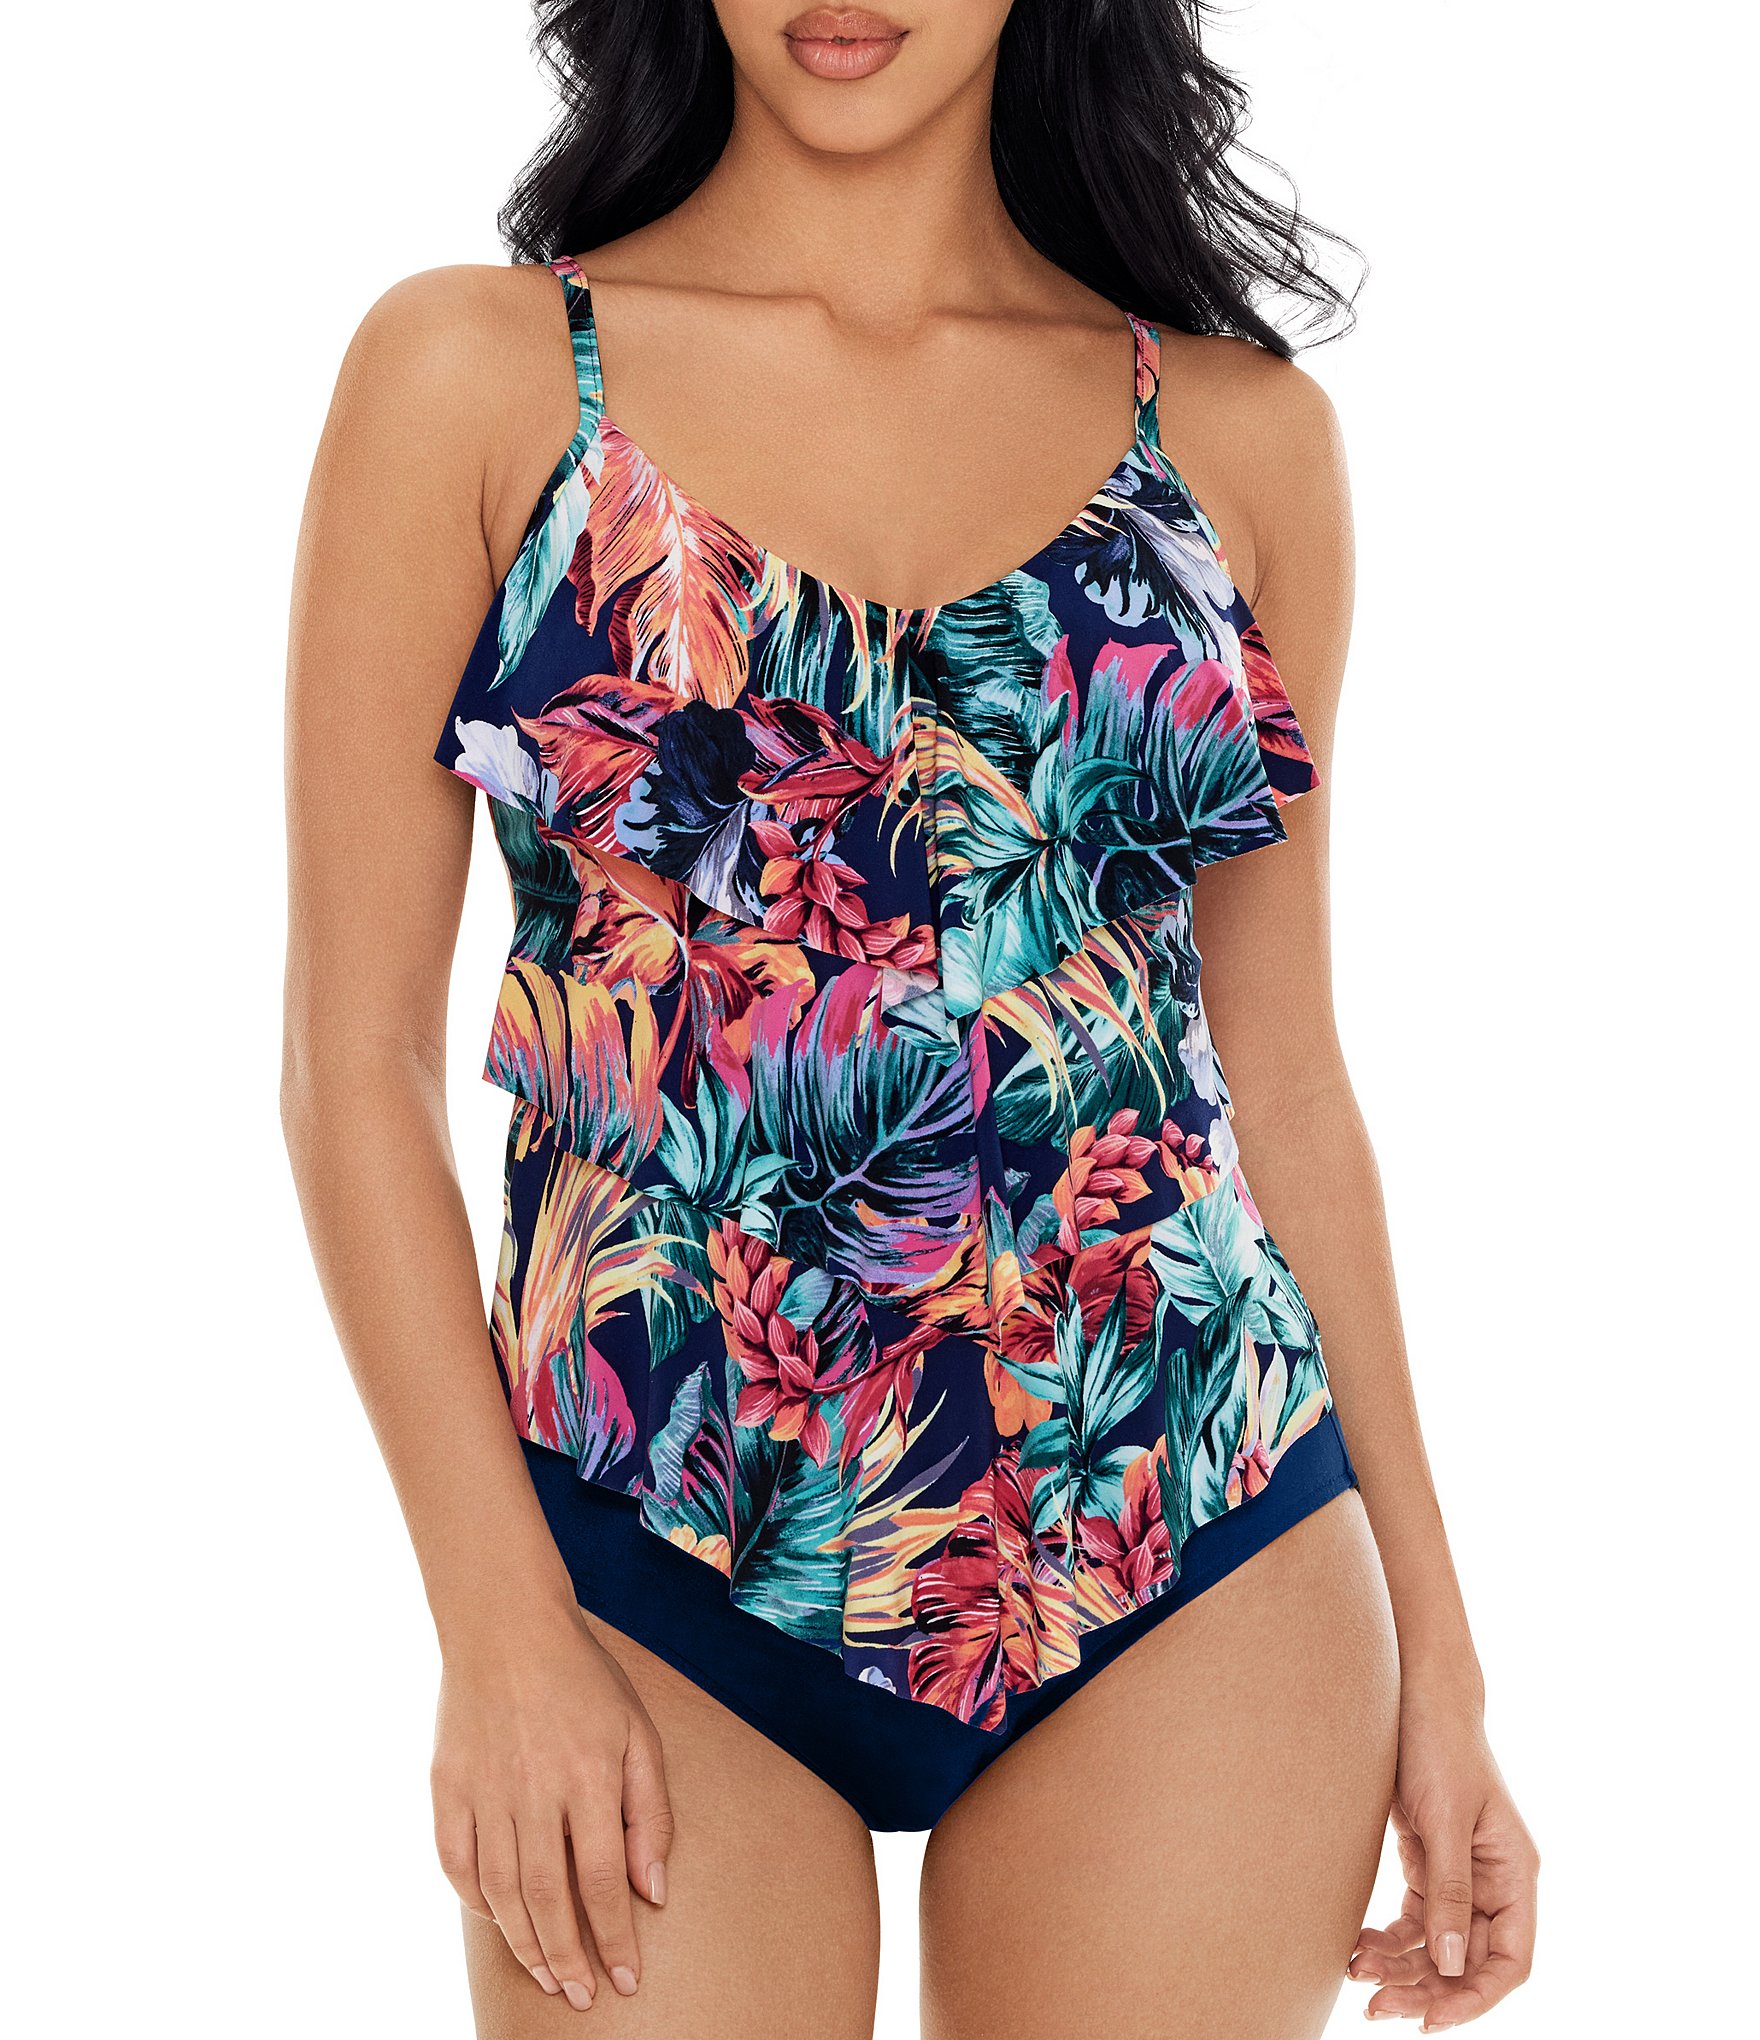 Shop for Size 18, Swimsuits, Womens